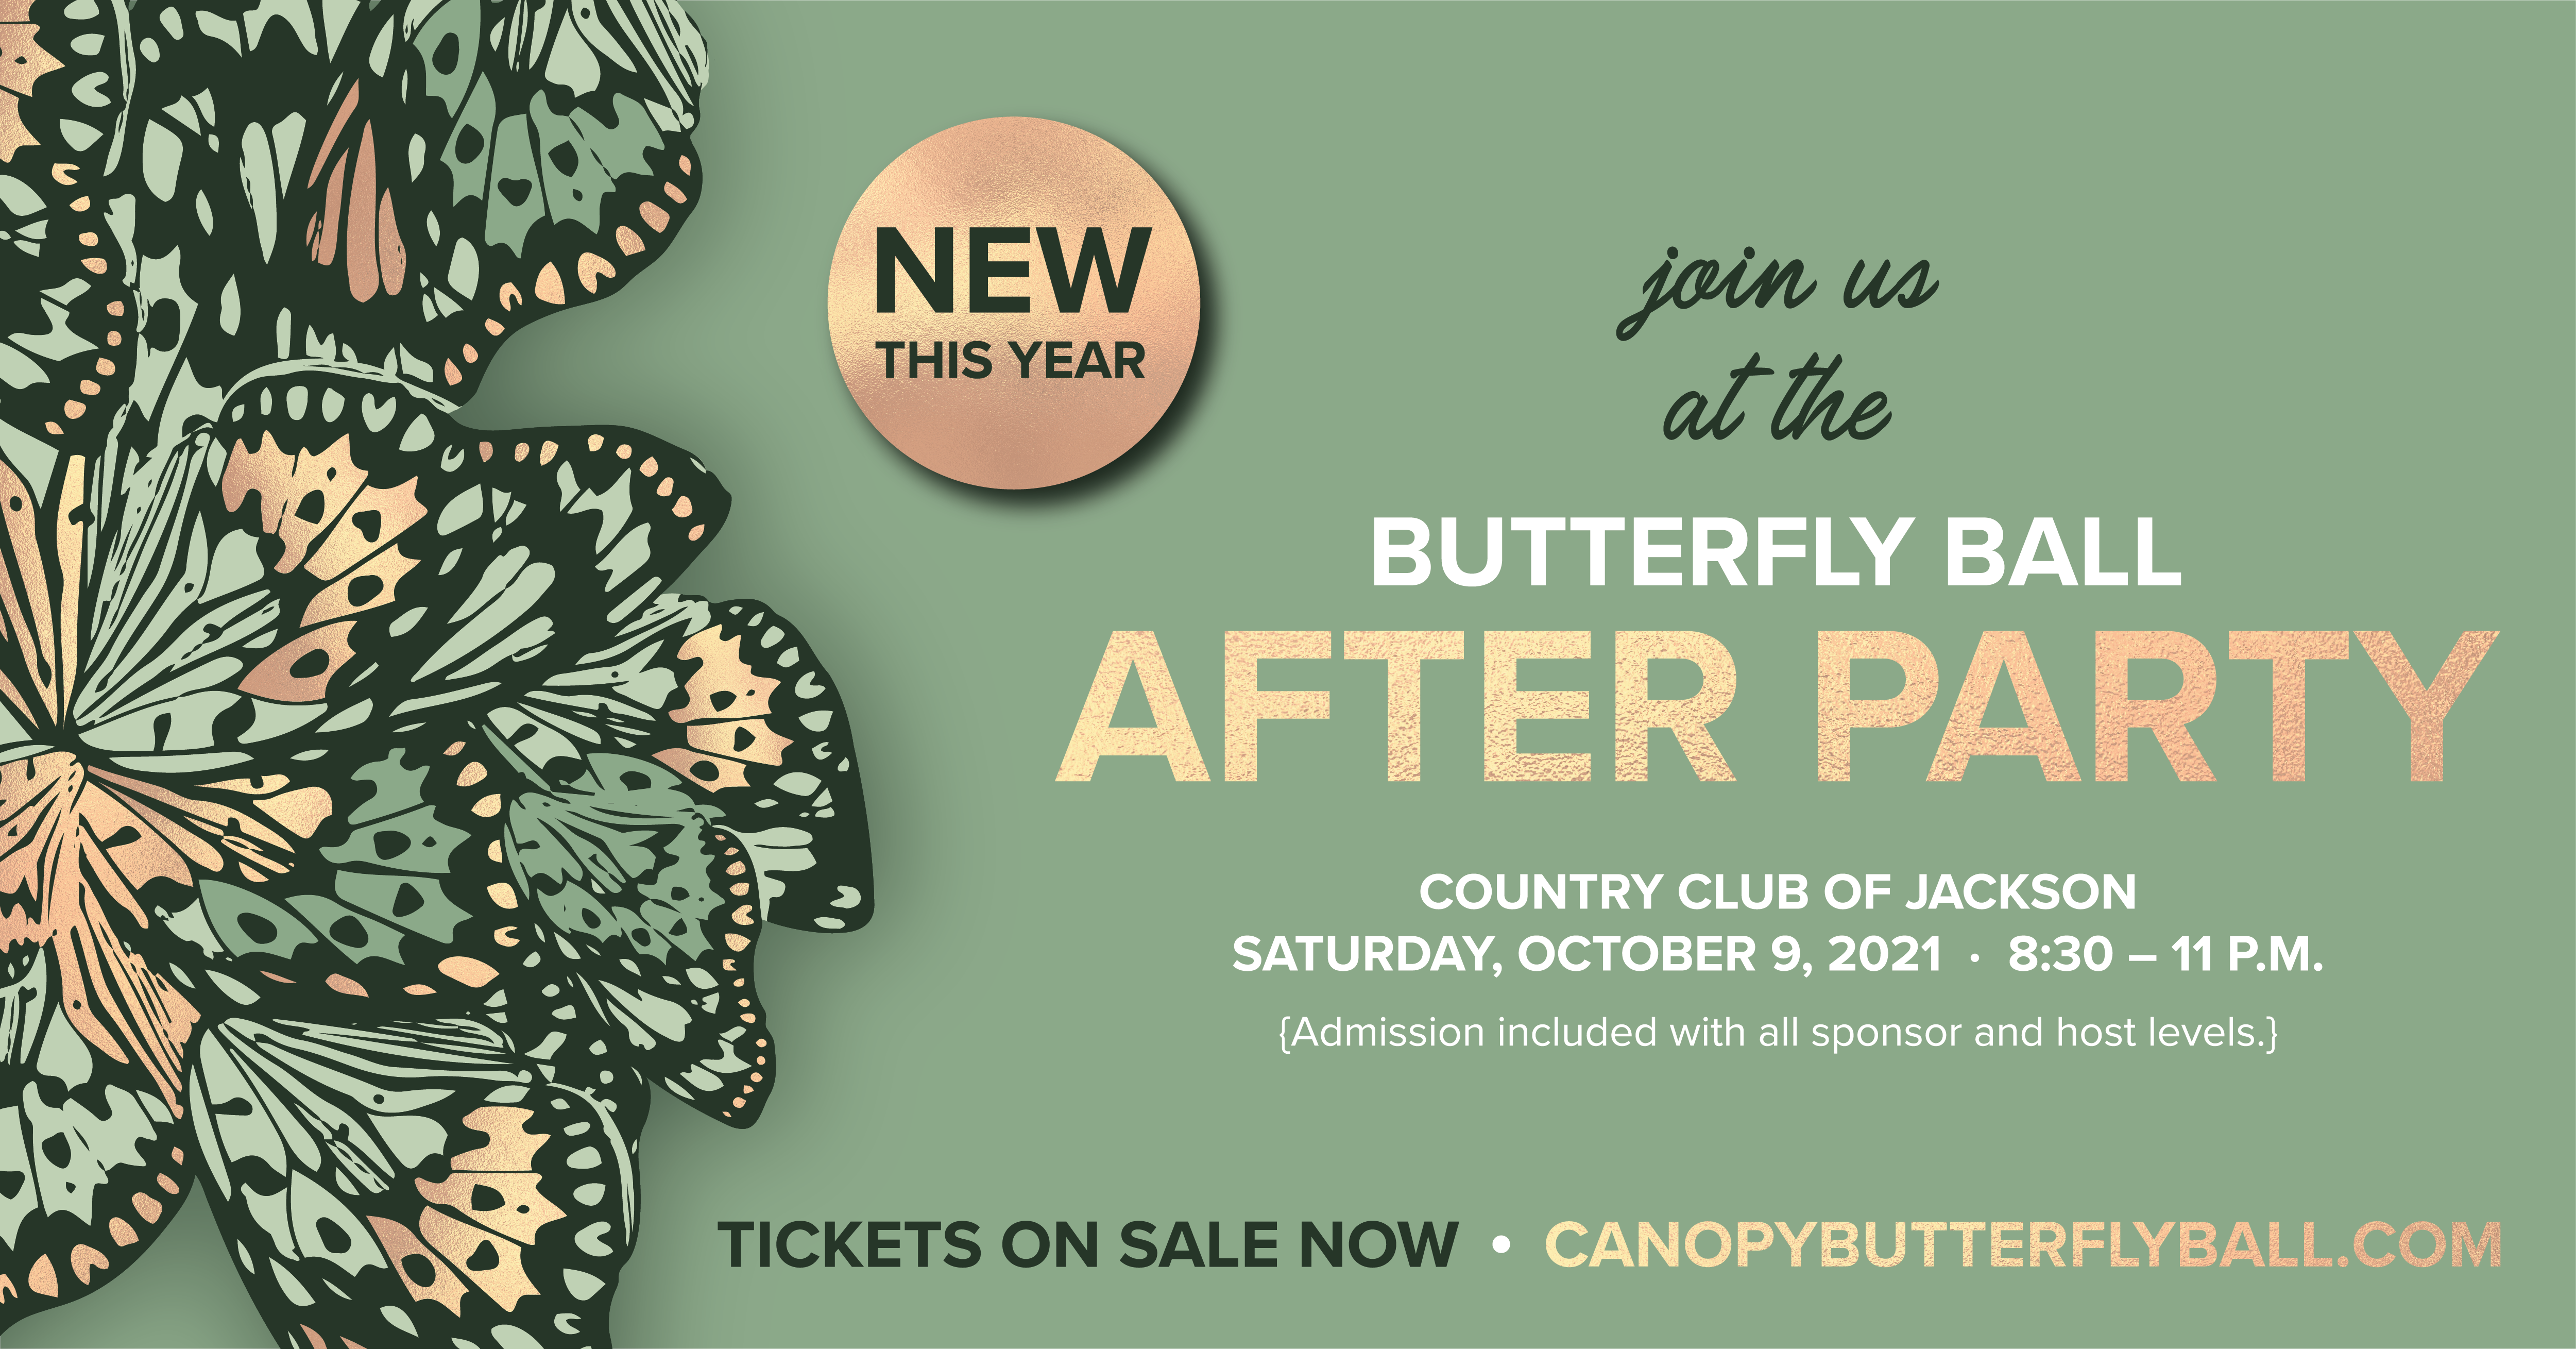 JUST ANNOUNCED | After Party coming to Canopy’s Butterfly Ball